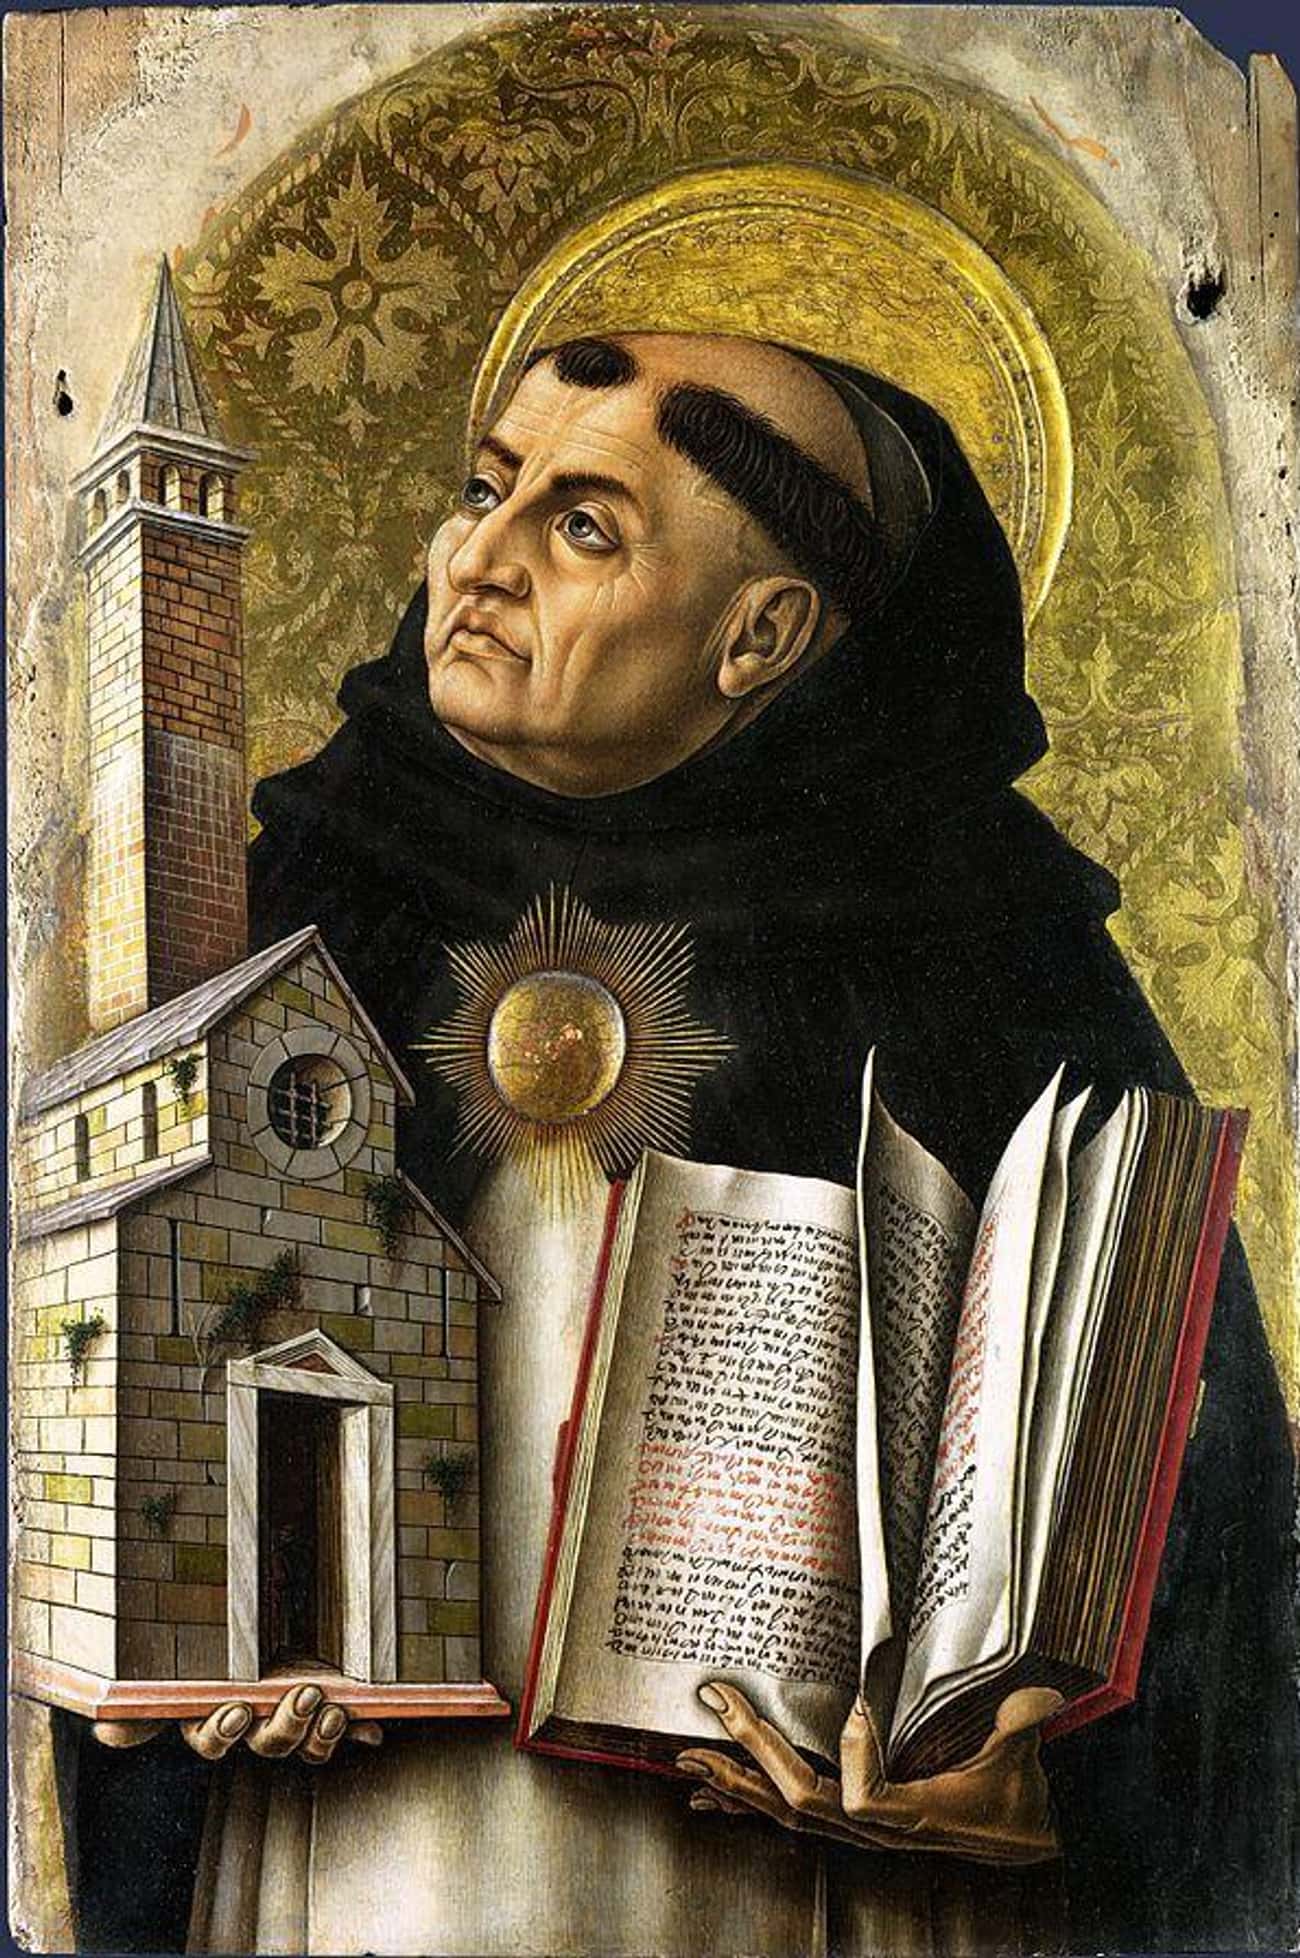 St. Thomas Aquinas Chased A Sex Worker With Fire And Crosses